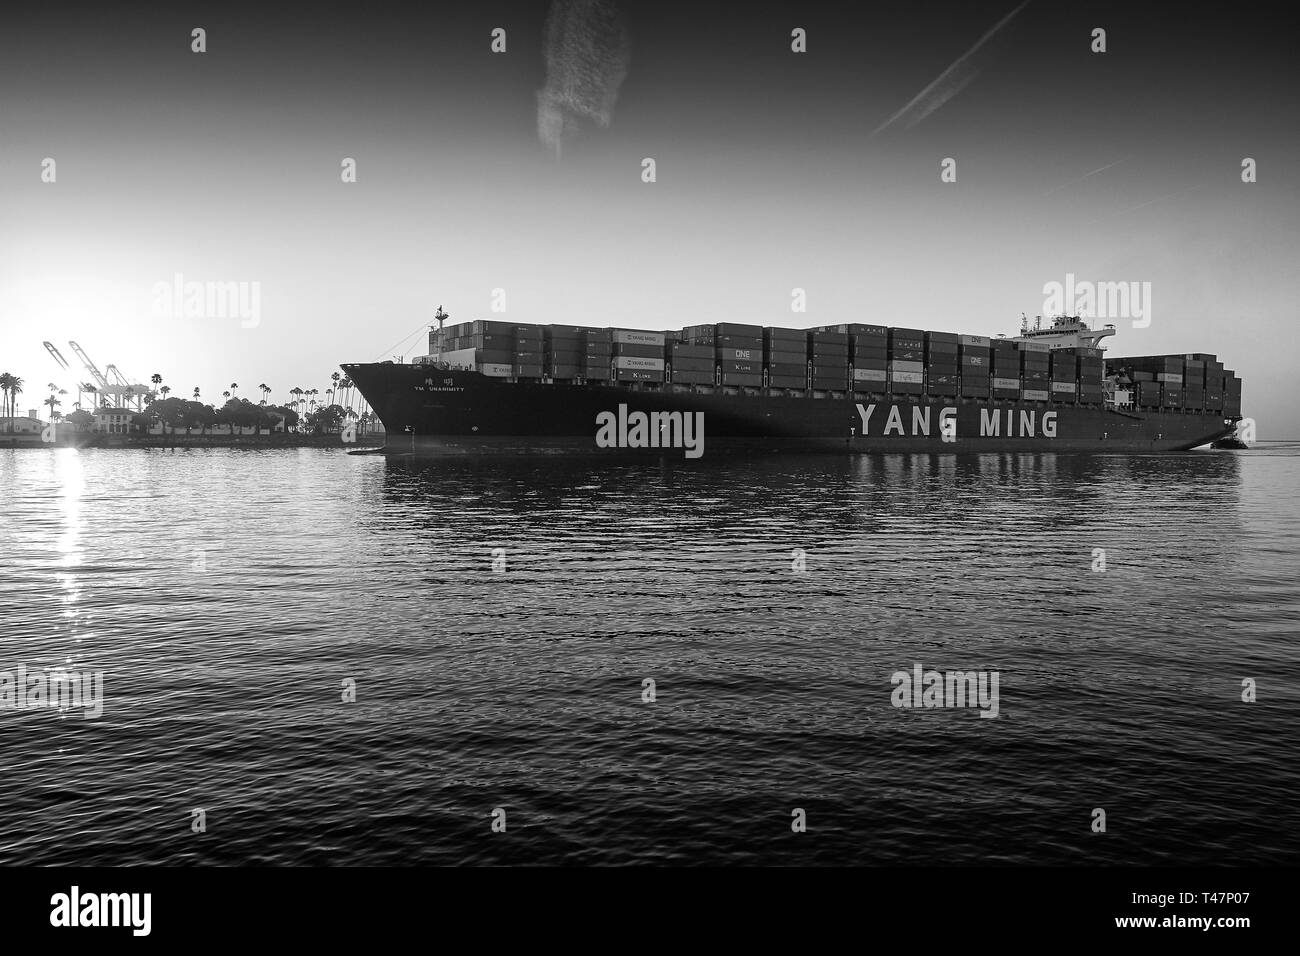 Black And White Photo Of The Giant YANG MING Container Ship, YM UNANIMITY, Entering The Los Angeles Main Channel, Bound For The Port Of Los Angeles Stock Photo